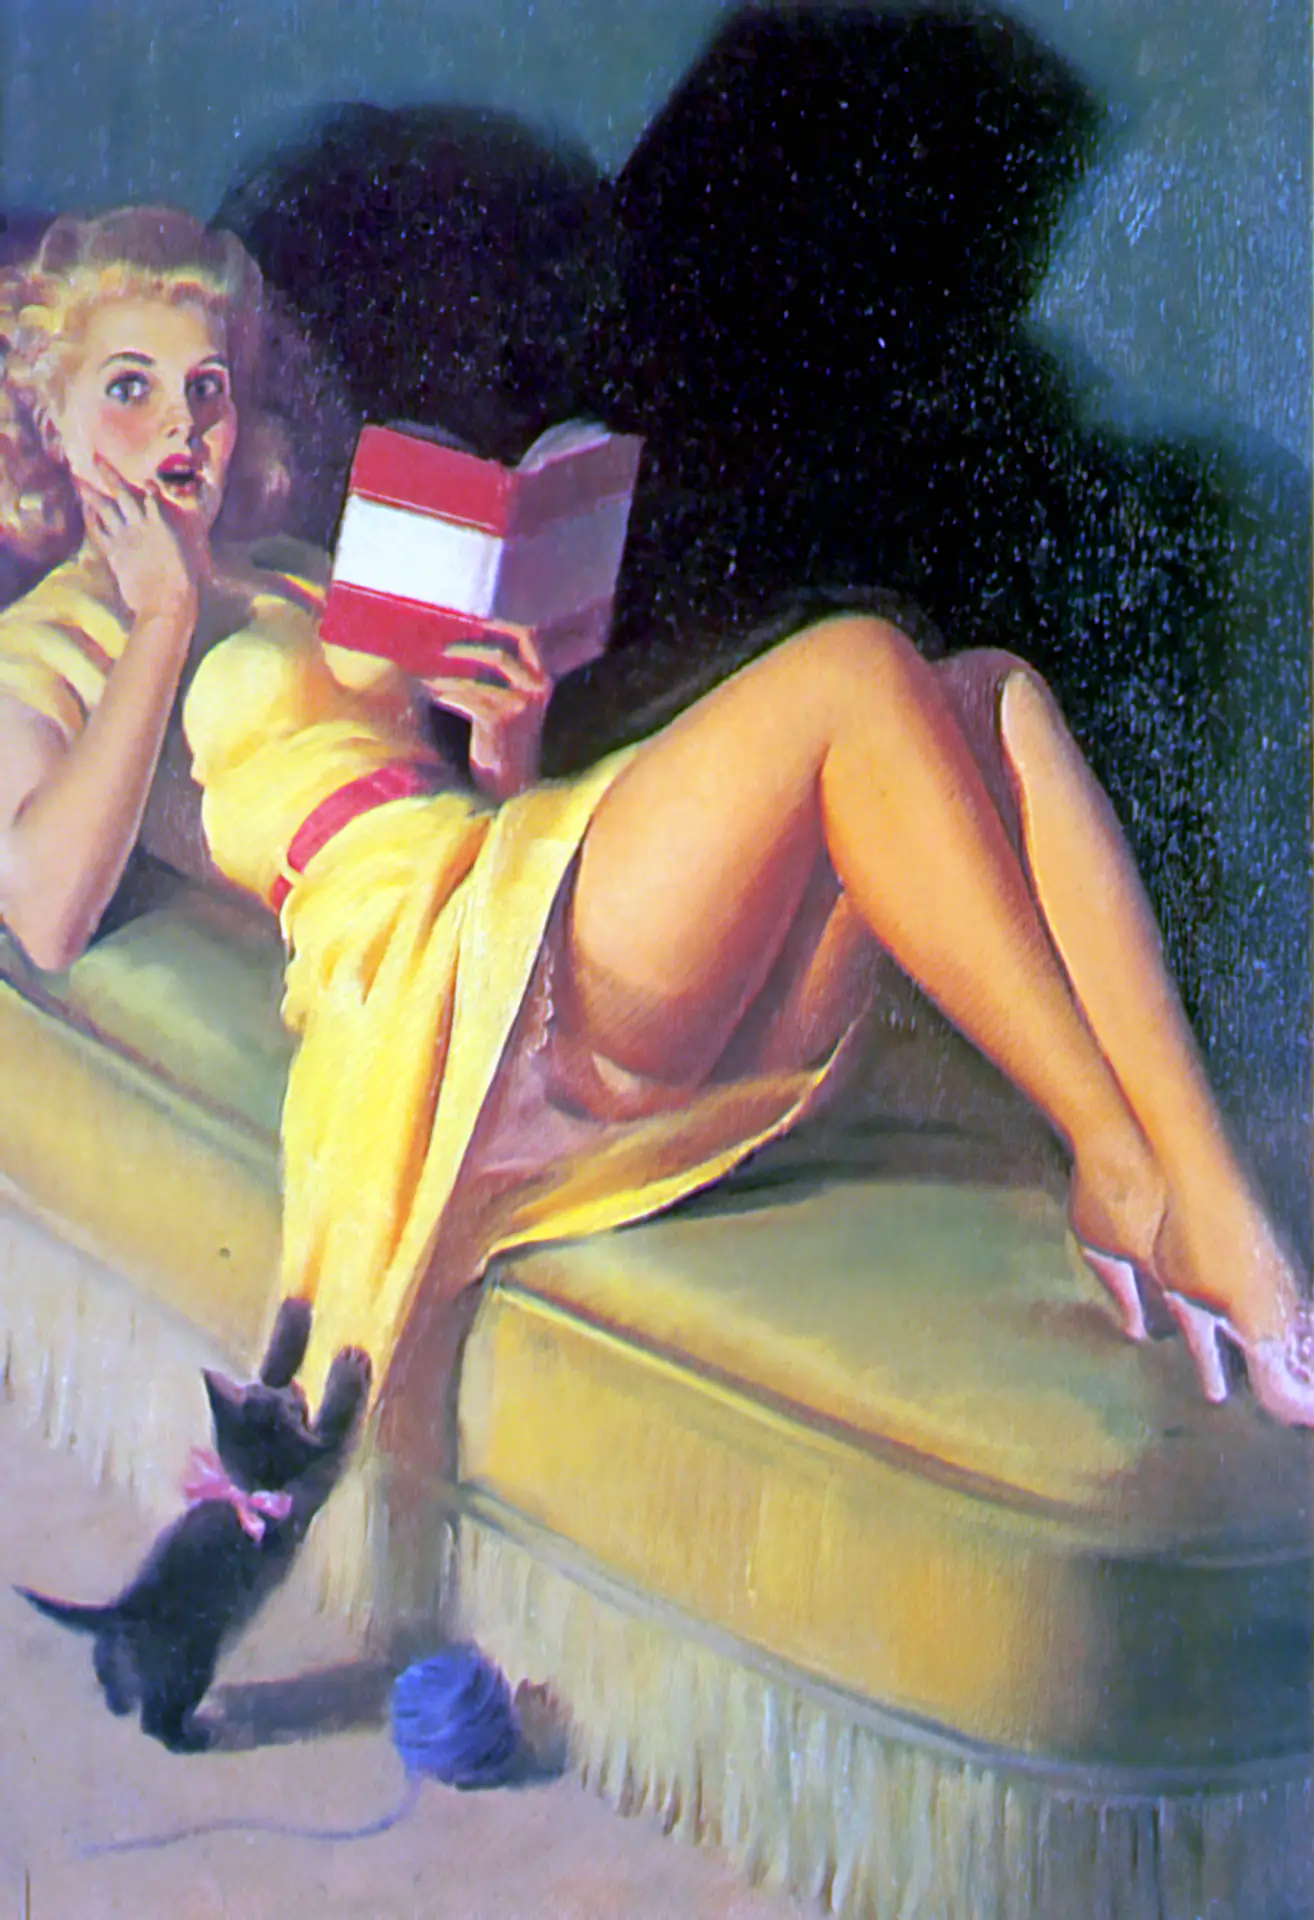 Scared classic blonde babe reads a book and exposes her long legs